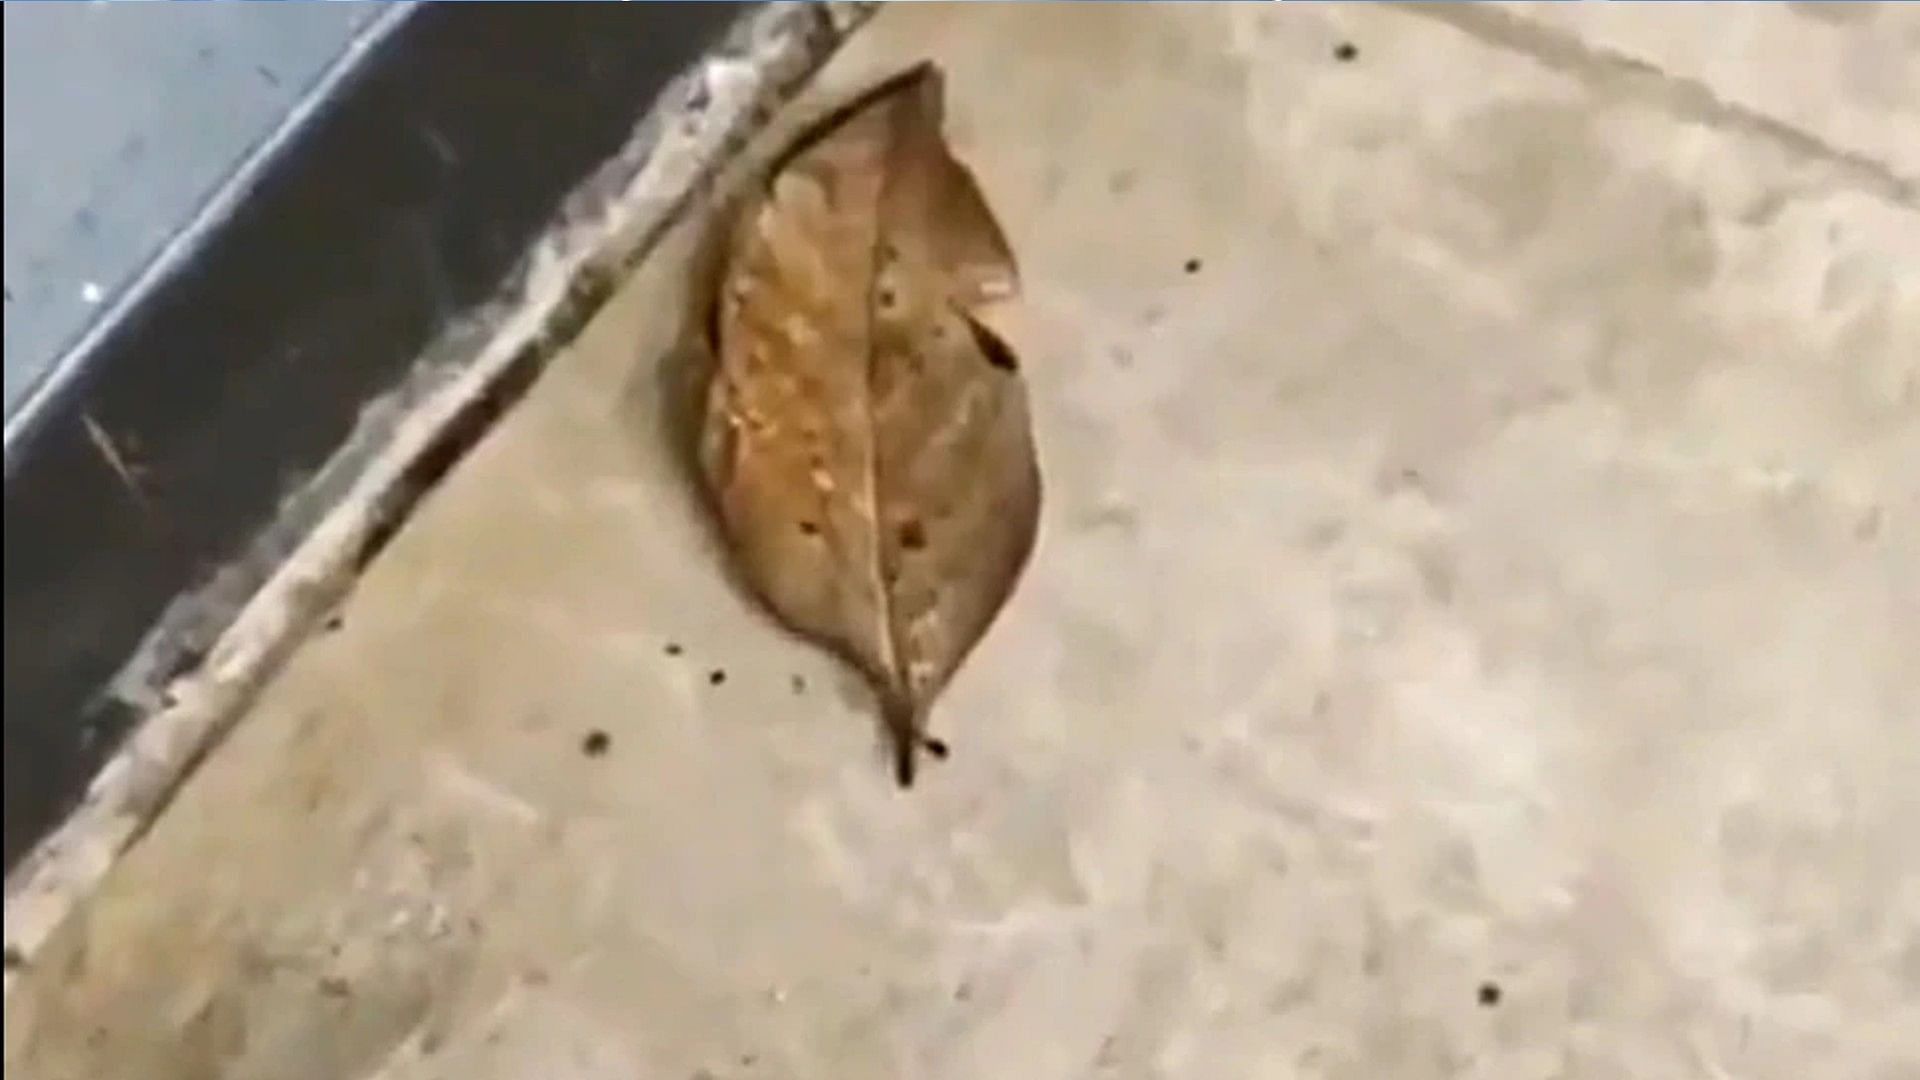 Orange oakleaf beautiful insect butterfly looks like a dry leaf video viral